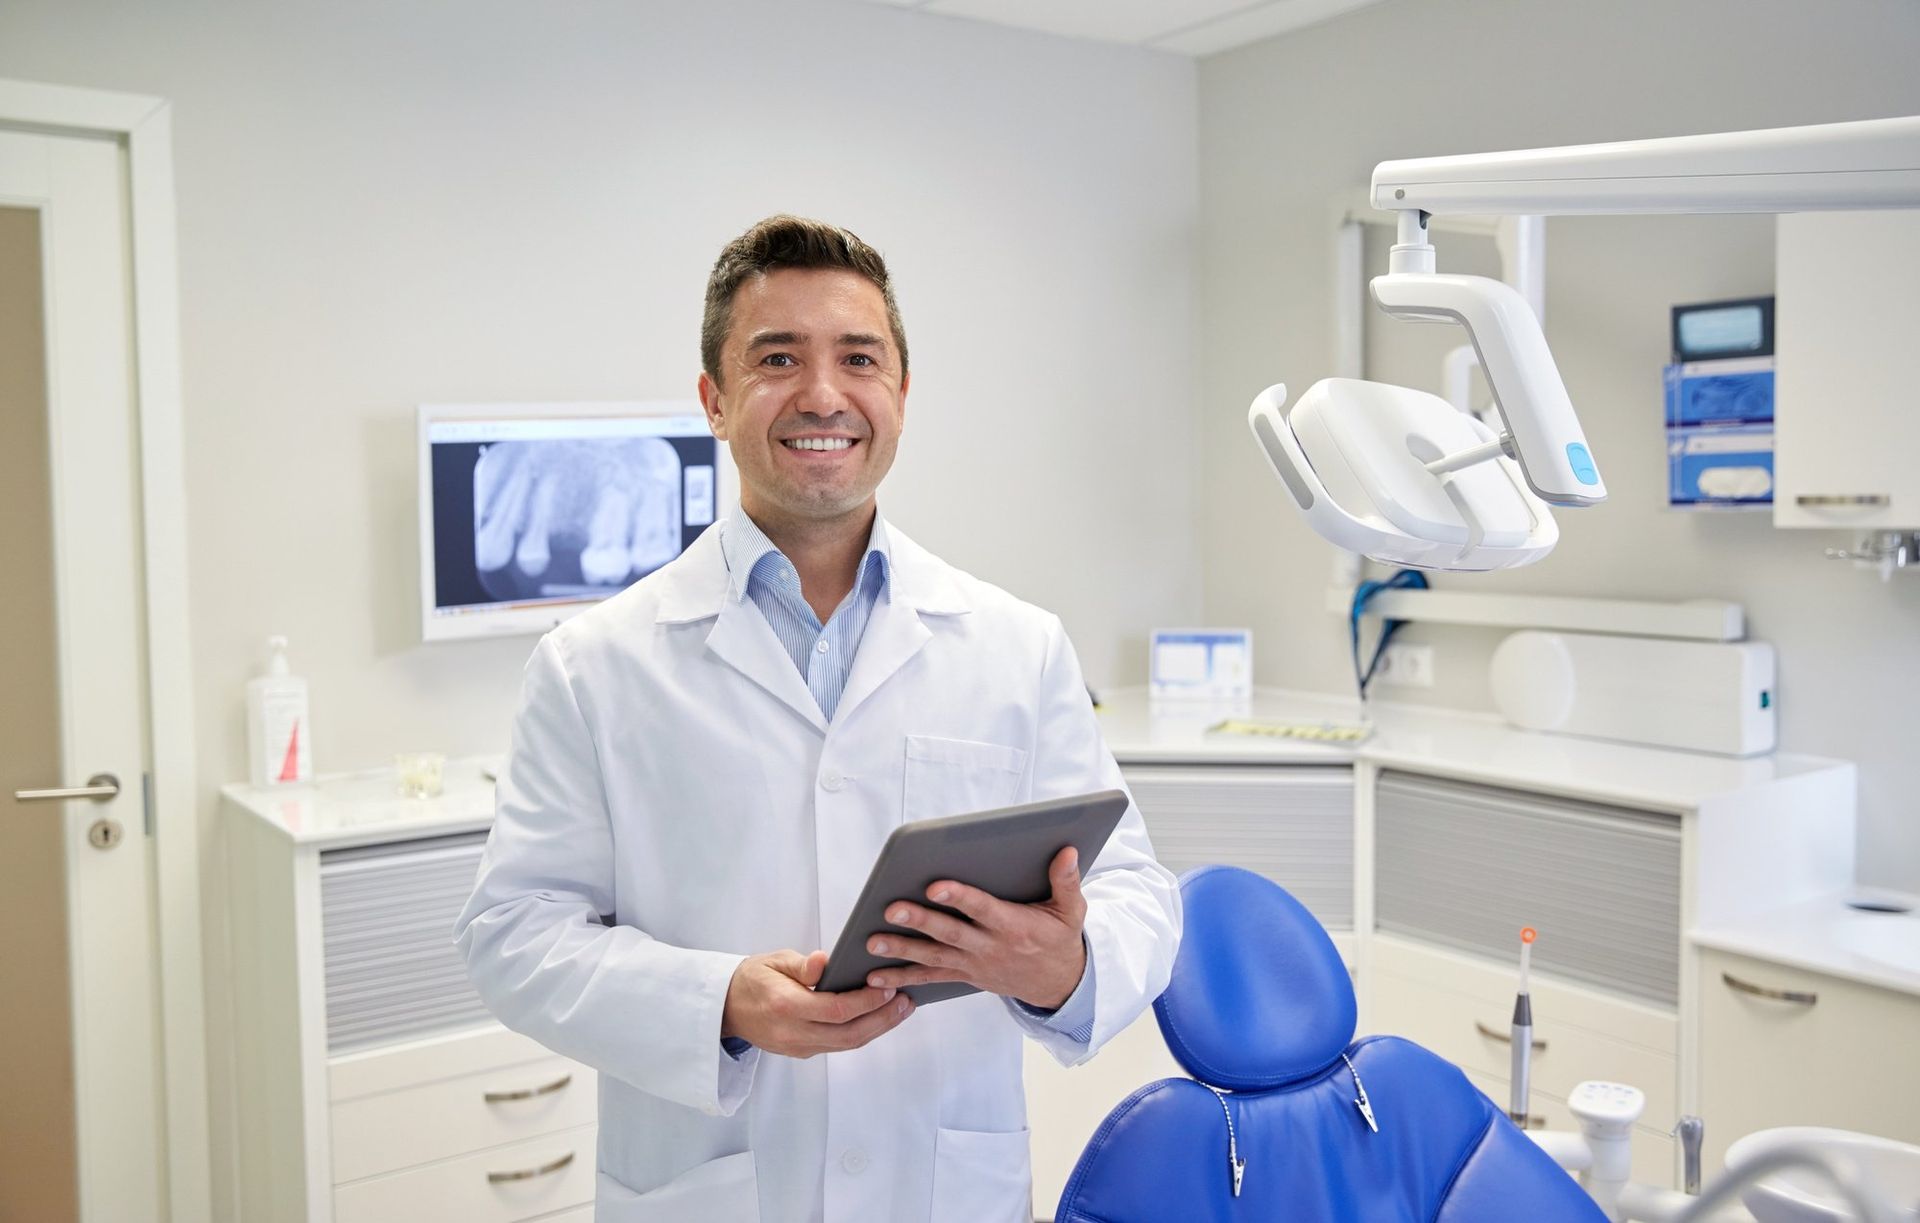 Dentist smiling and standing in dental room